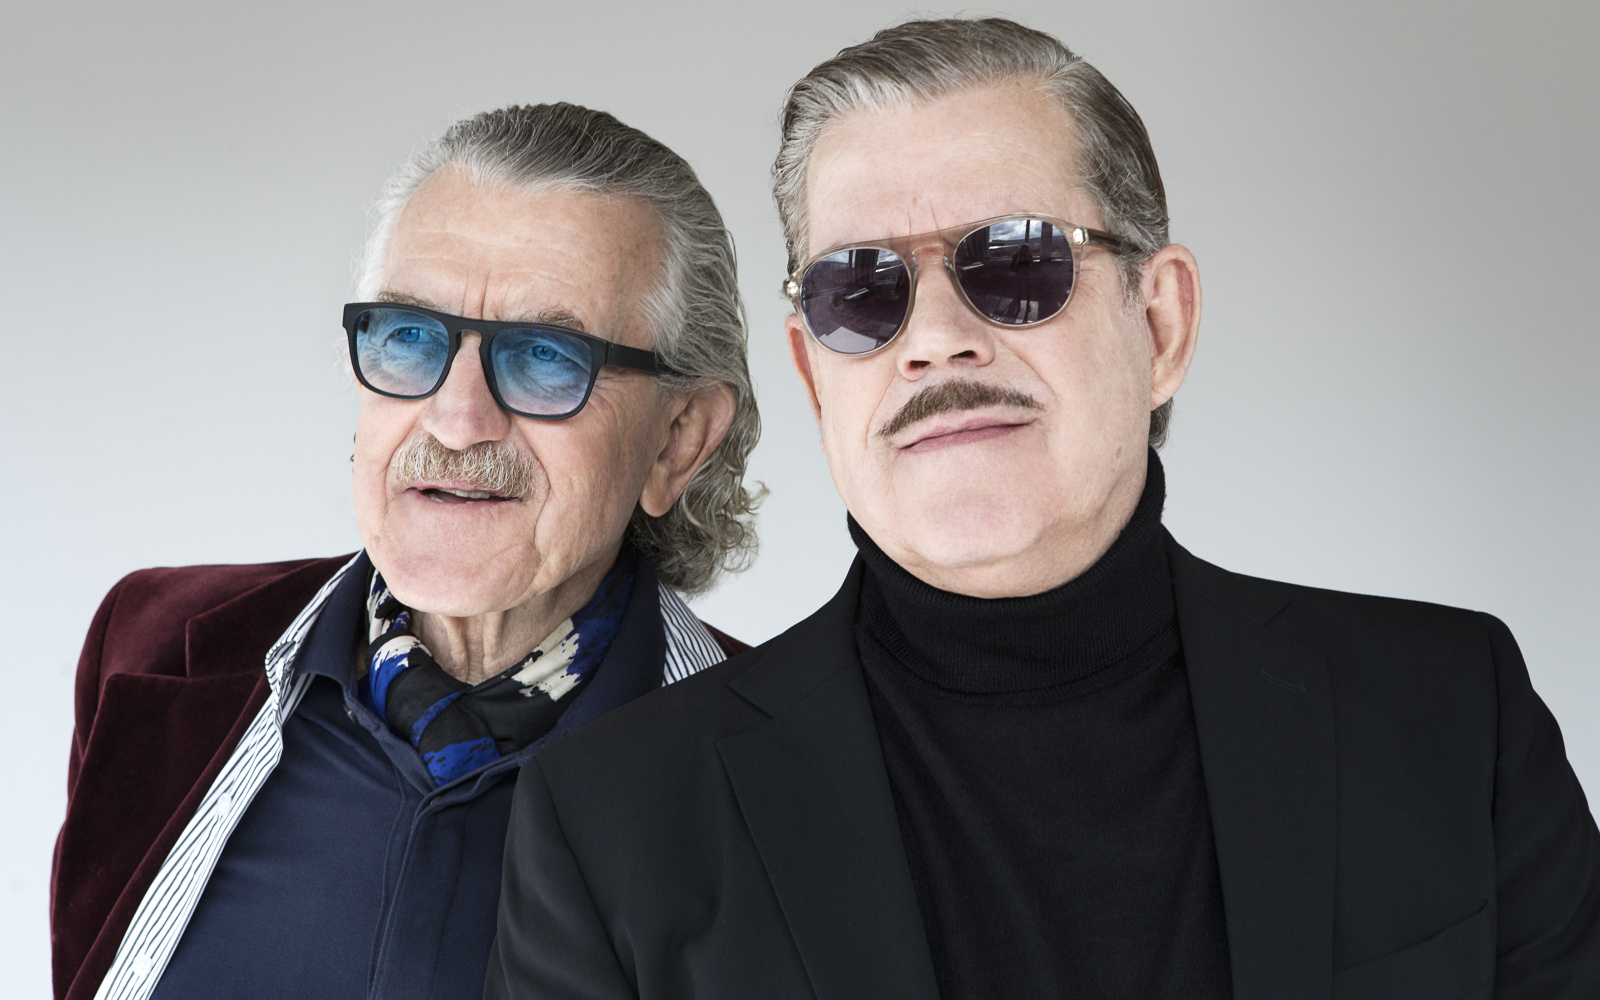 Two men stand next to each other, the two heads are large. The right one wears sunglasses, a moustache, short hair combed backwards and a turtleneck with jacket. The left one wears colored sunglasses.